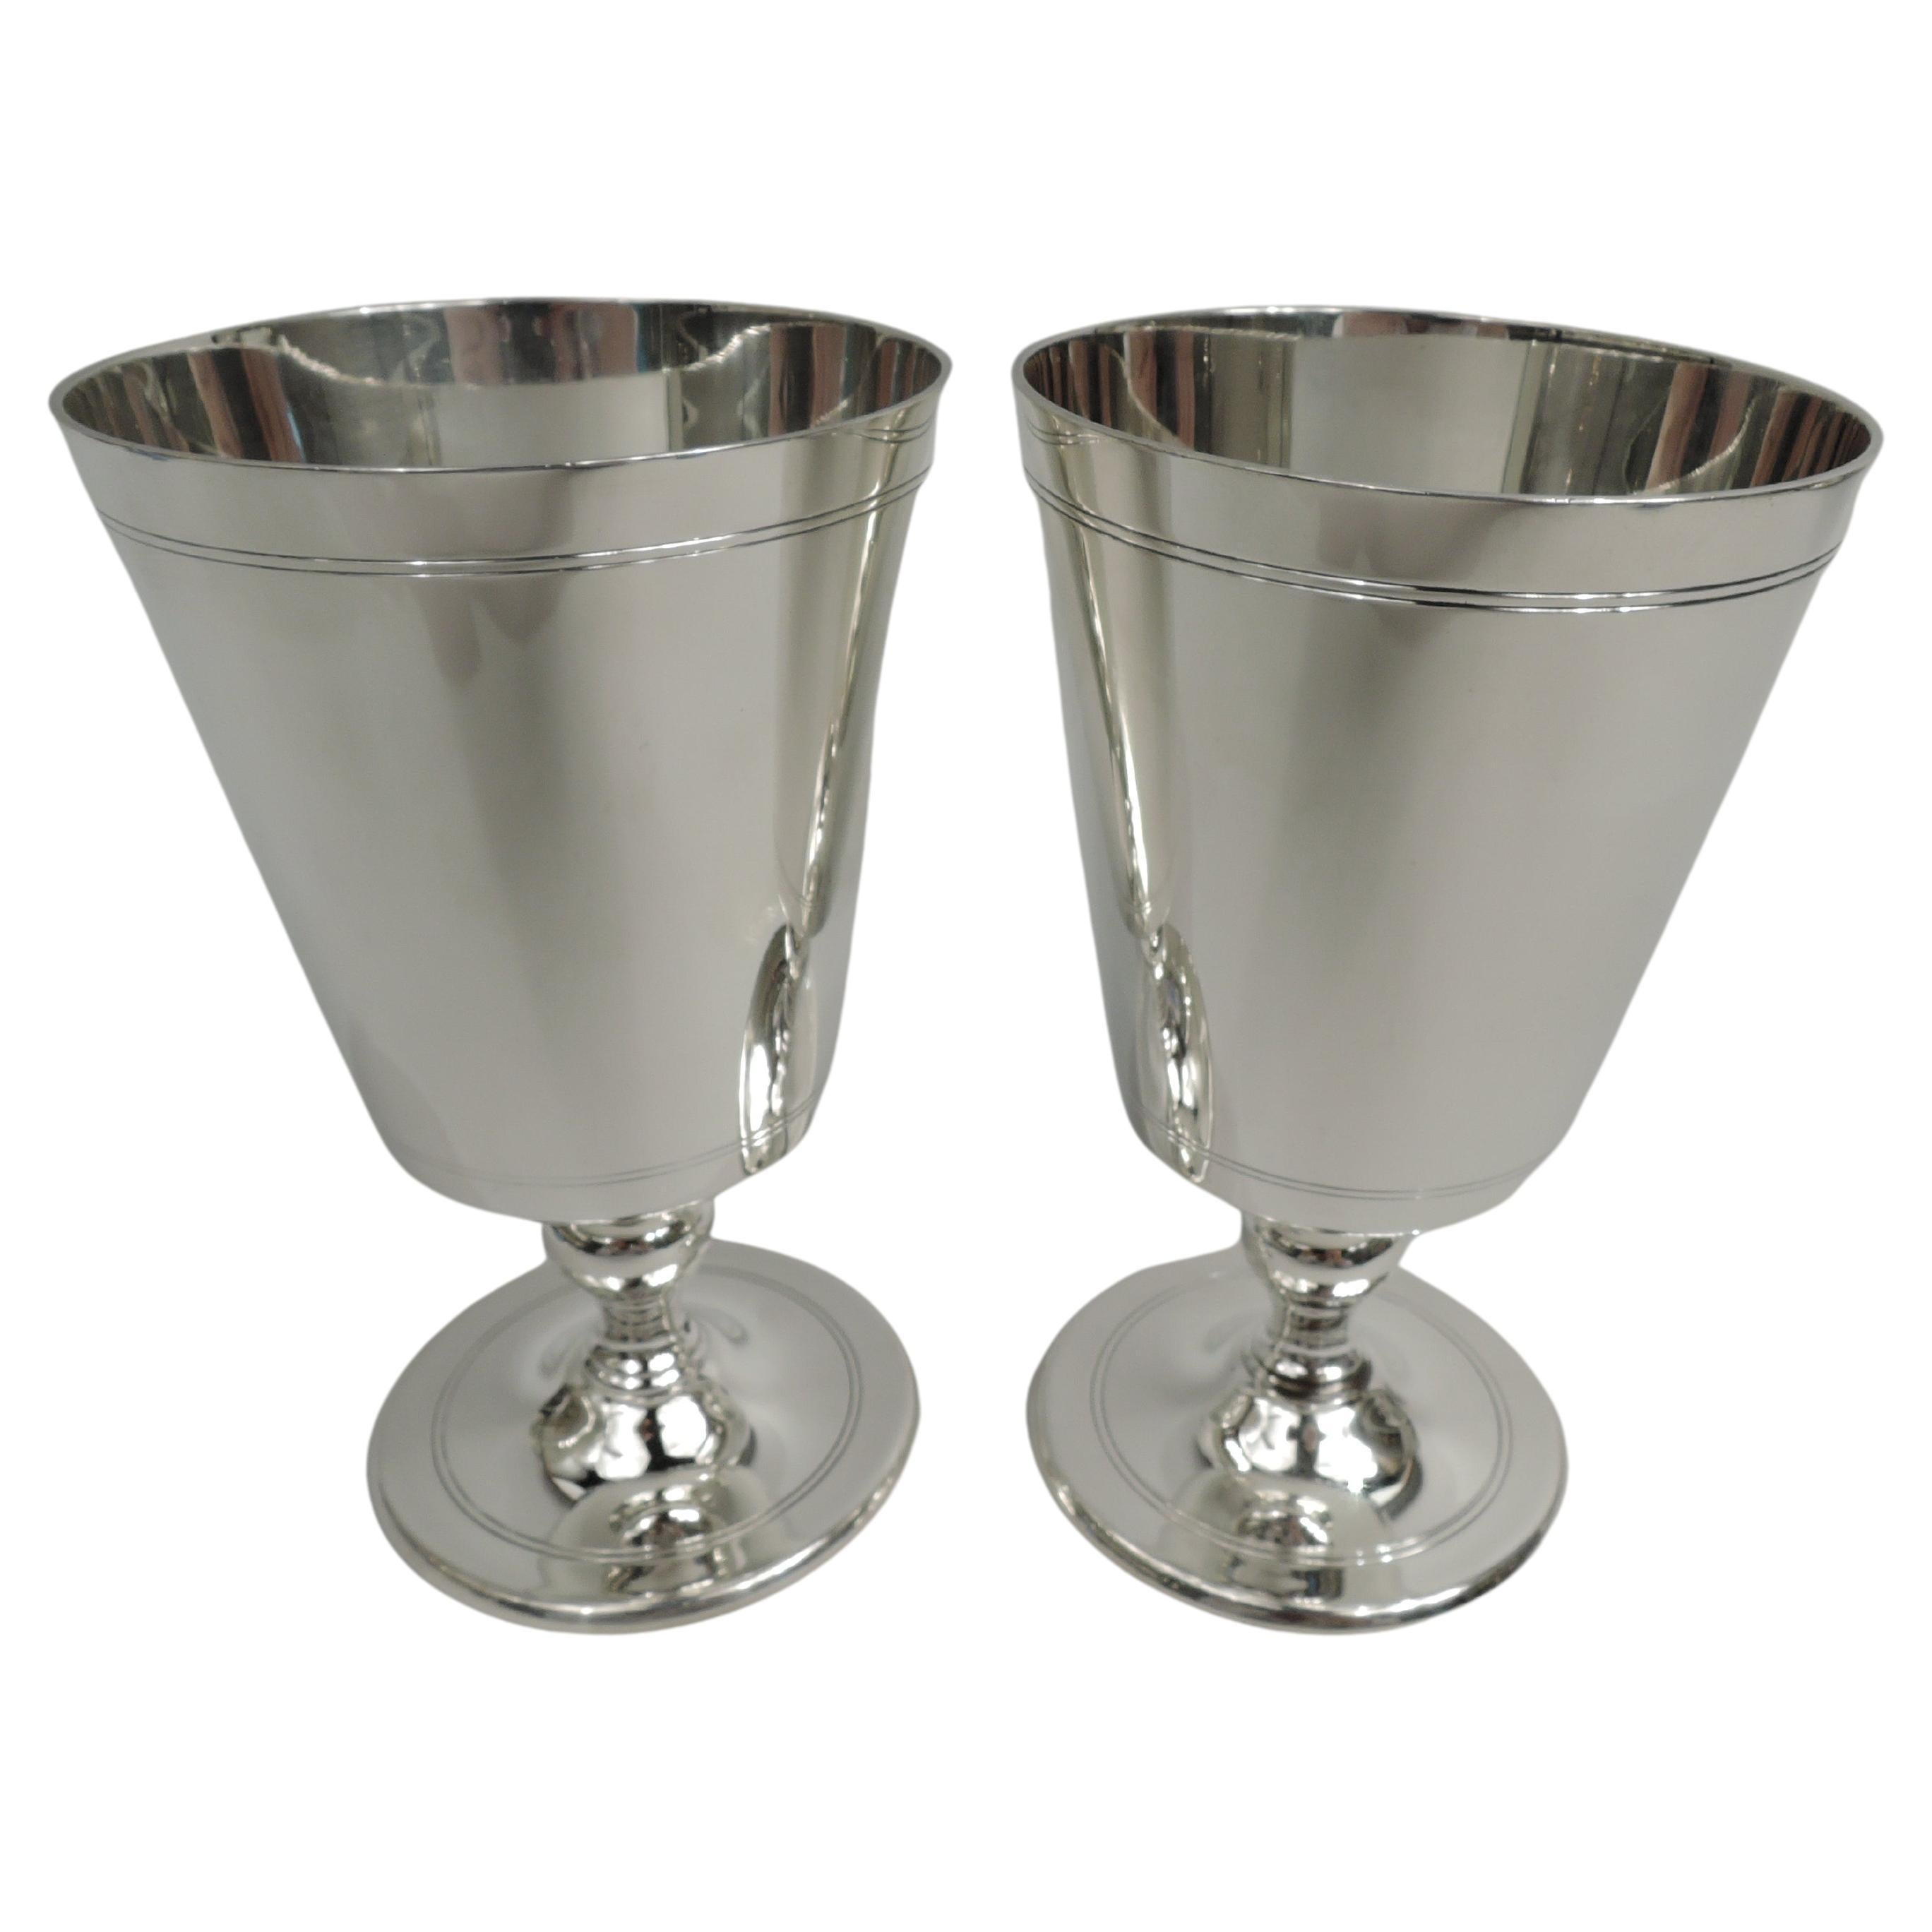 Pair of Tiffany & Co. Art Deco Sterling Silver Goblets for Twosome Tippling